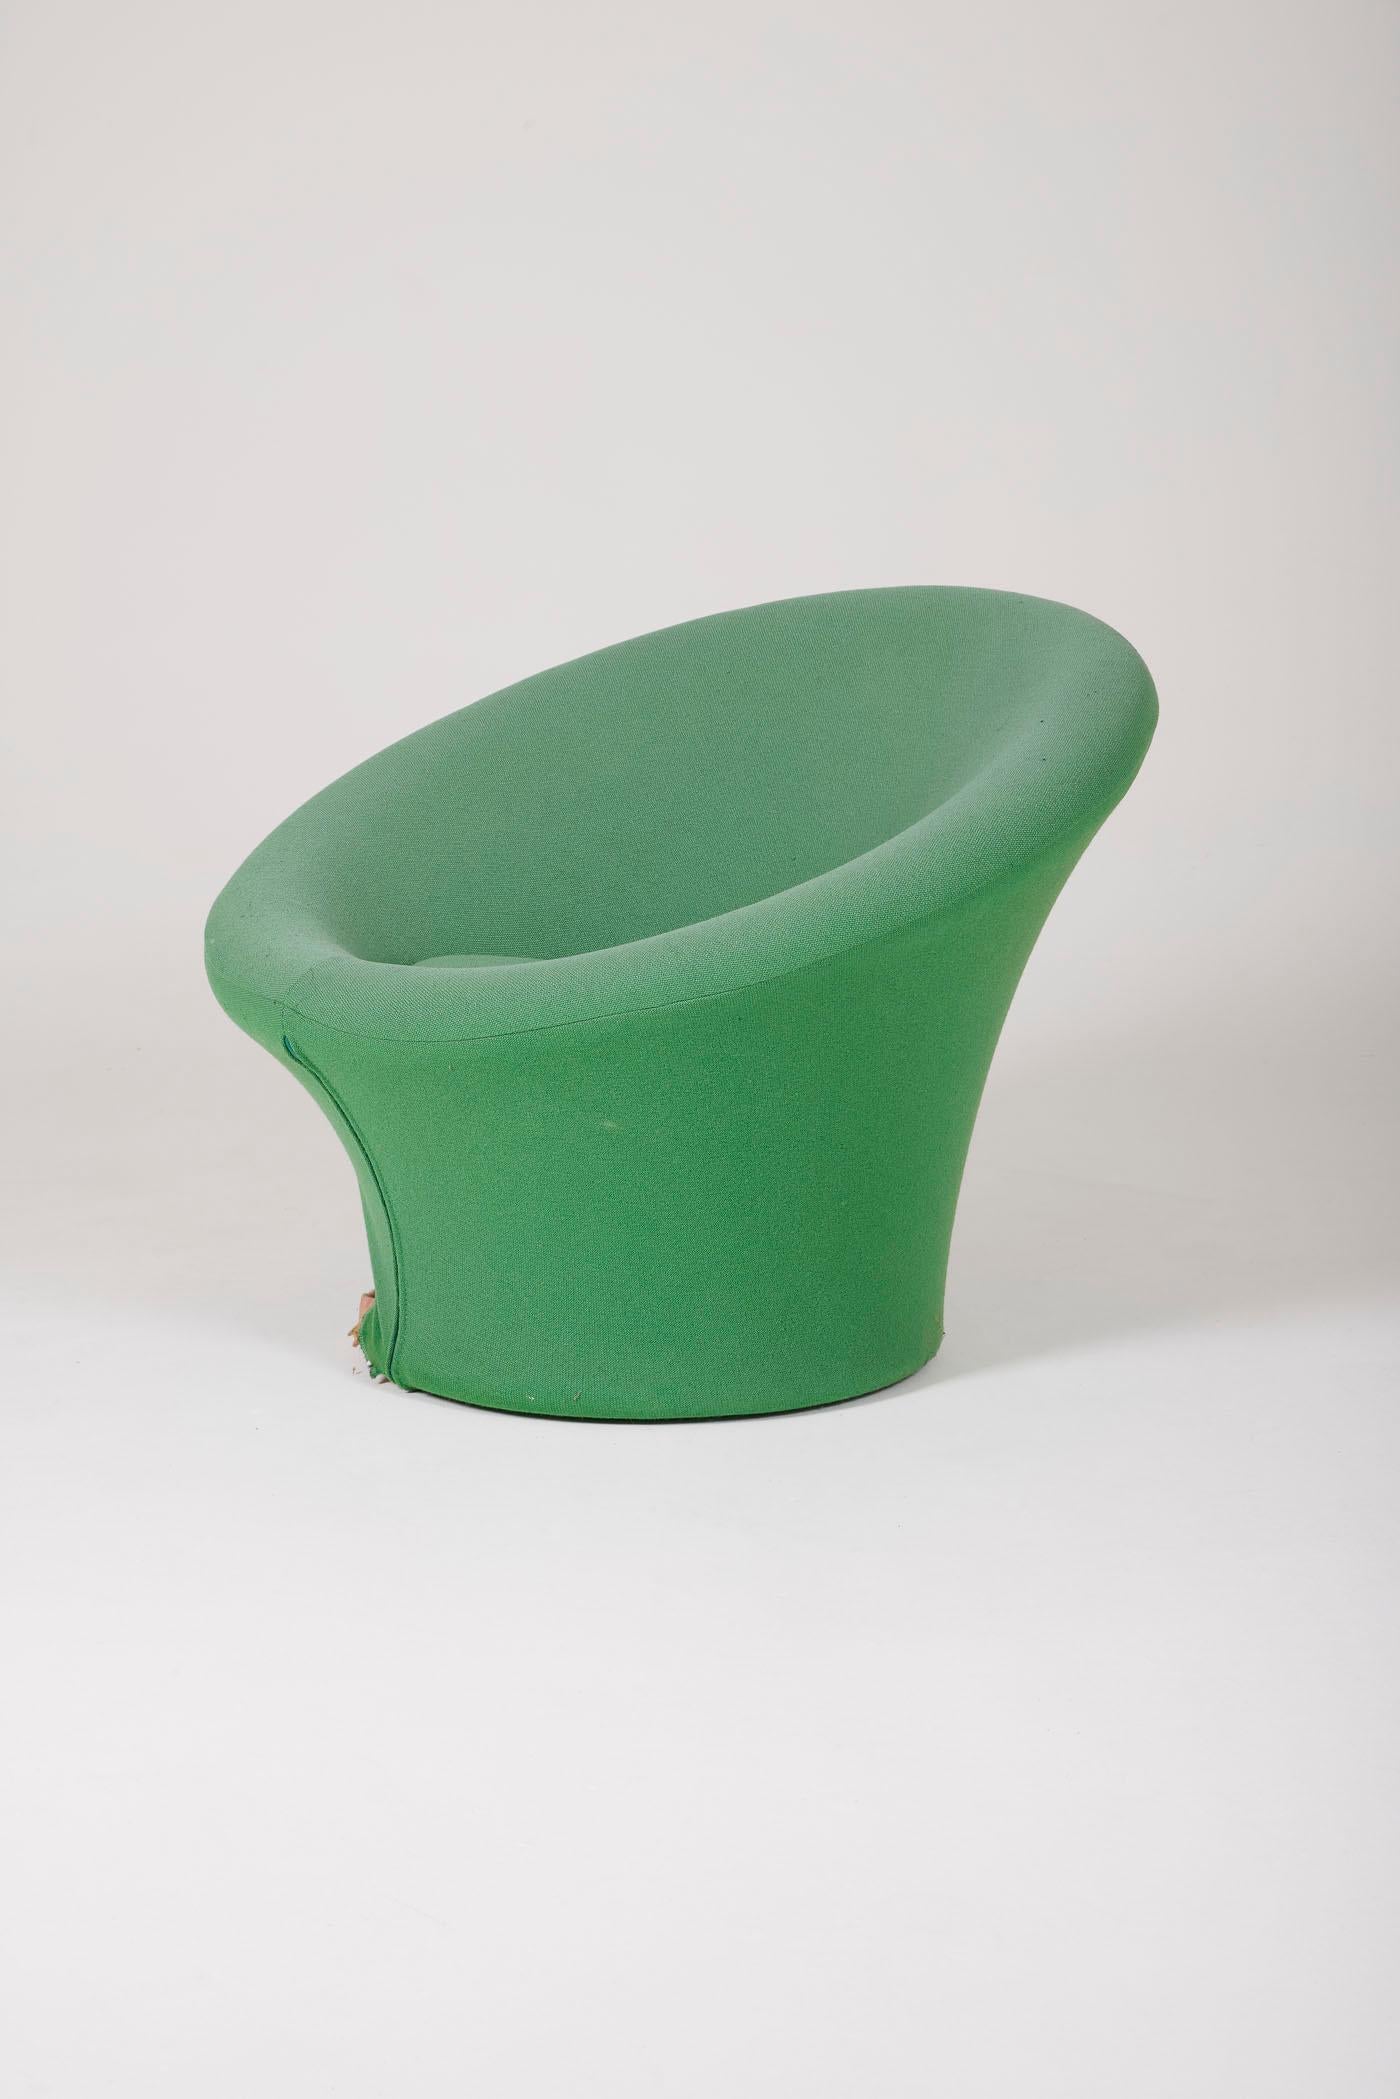  Mushroom Armchair by French designer Pierre Paulin (1927-2009), released by Artifort in the 1960s. This iconic armchair is upholstered in its original green fabric. Revolutionizing the design world in the 1960s with its vibrant colors and comfort,